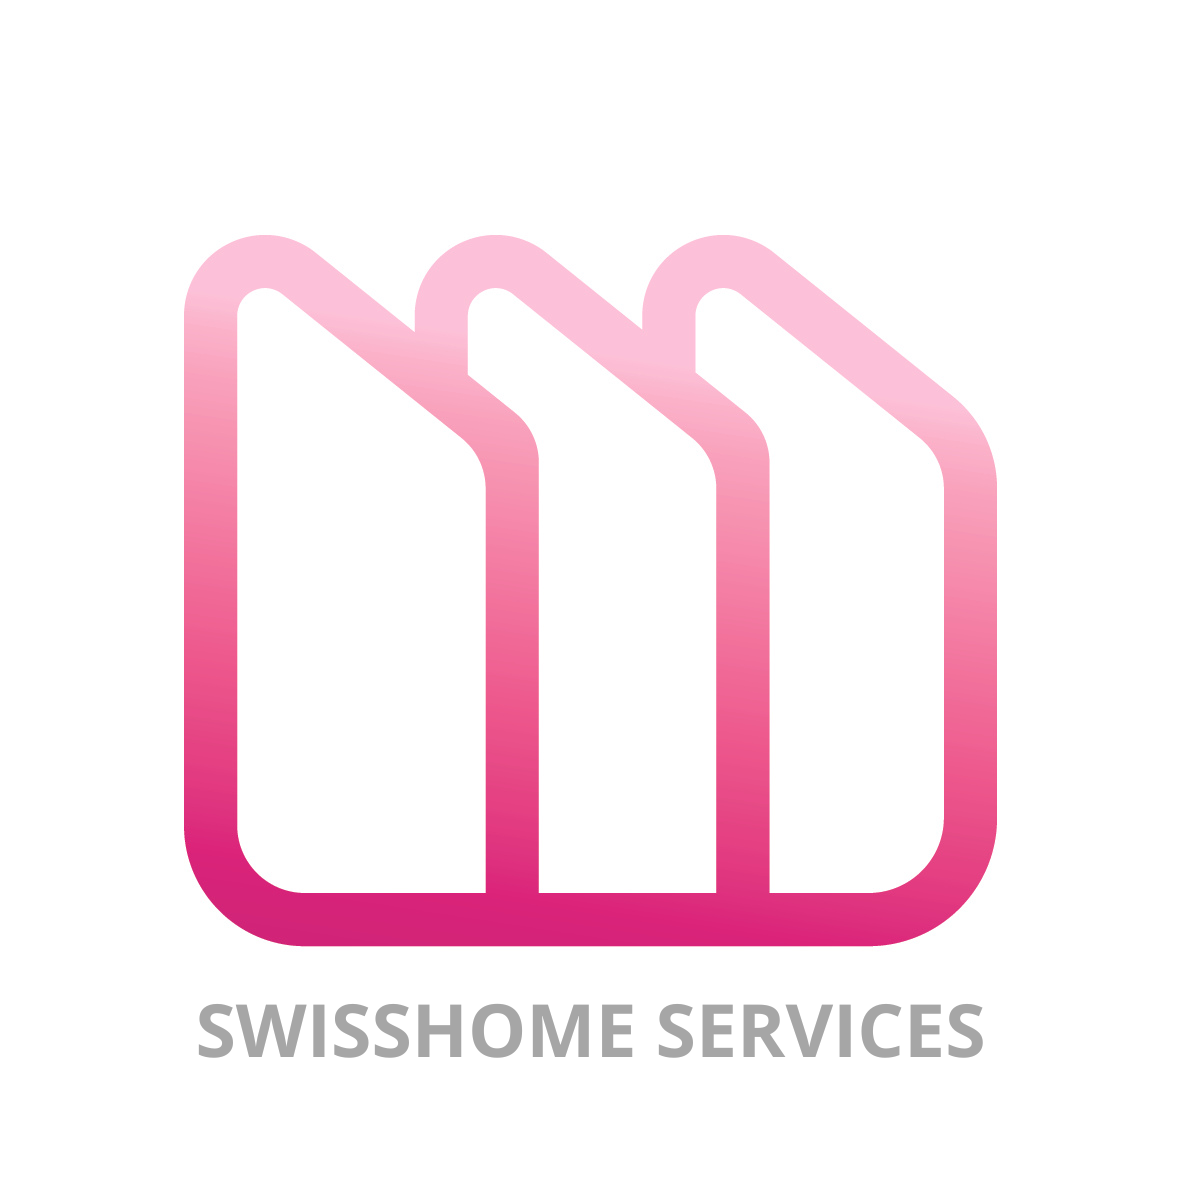 Swisshome-services.ch